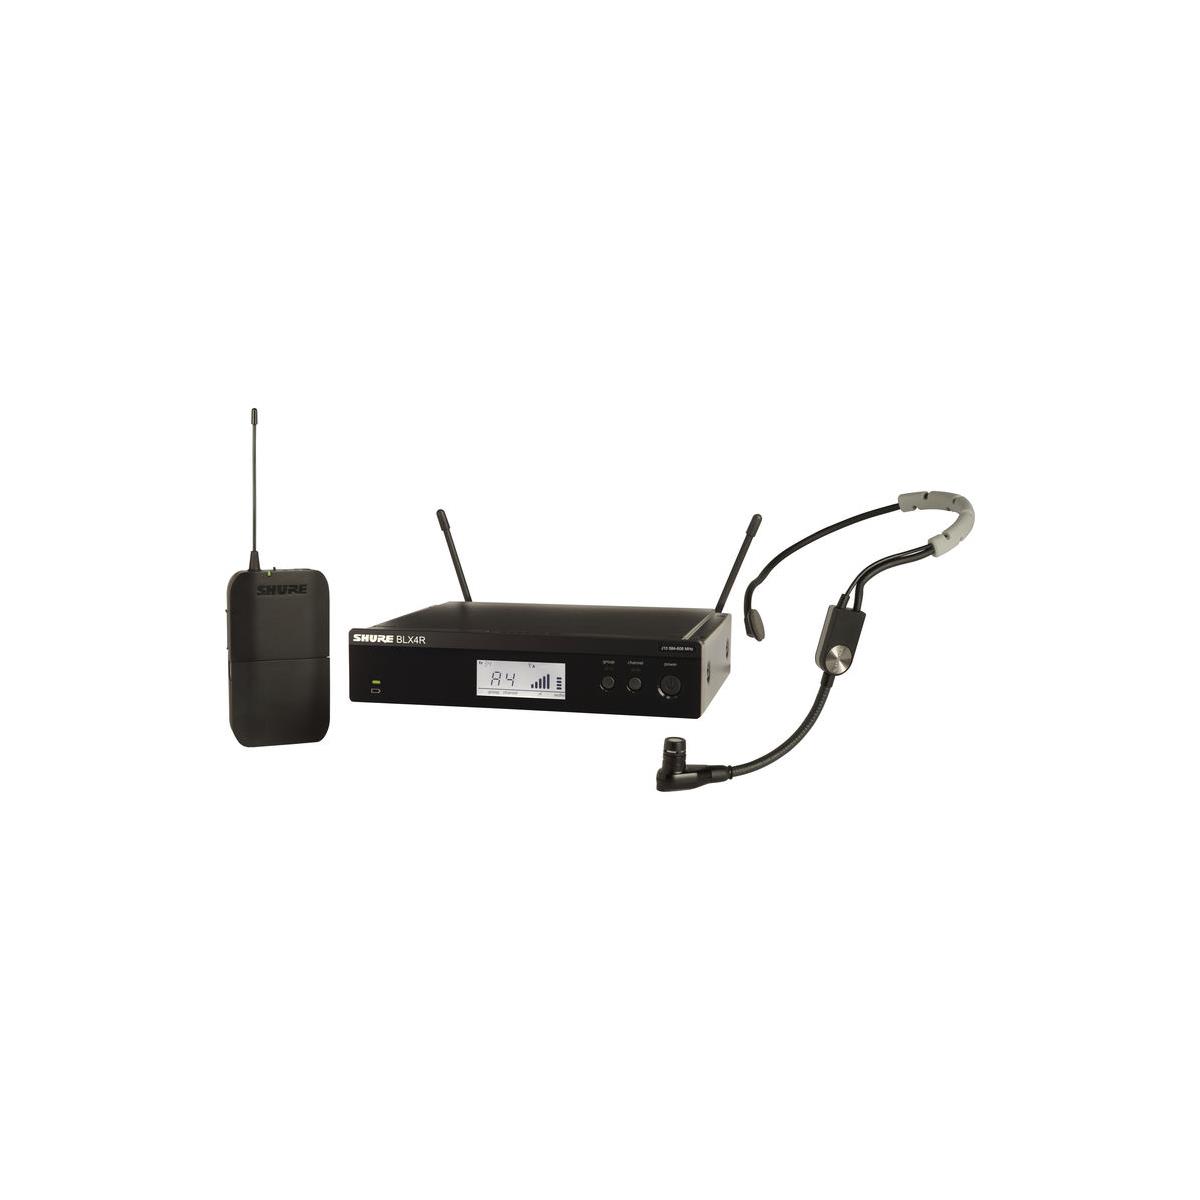 Image of Shure BLX14R/SM35 Headset Wireless Microphone System